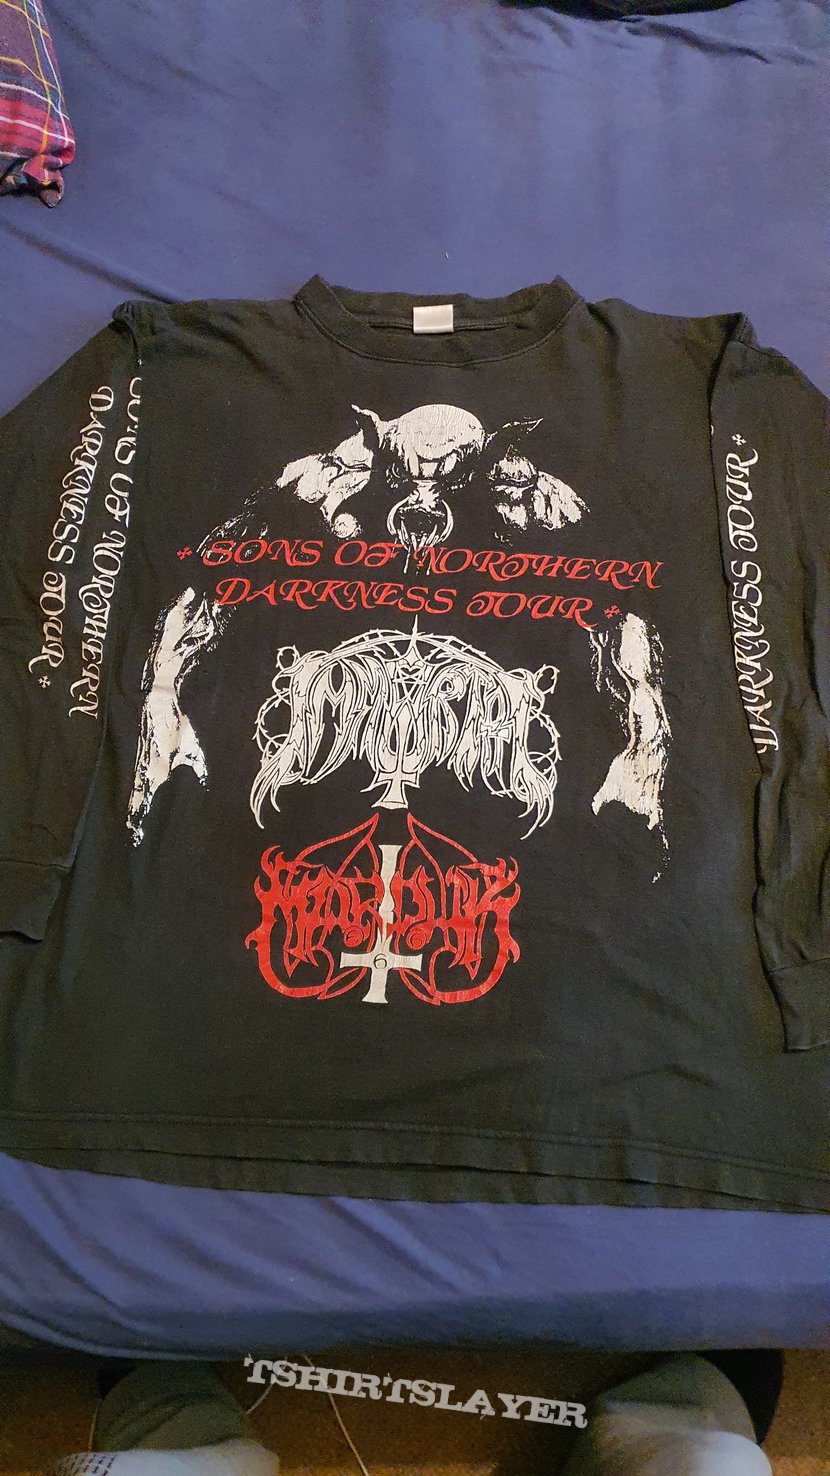 Immortal - Marduk &quot;Sons of Northern Darkness &quot; 1994 longsleeve 